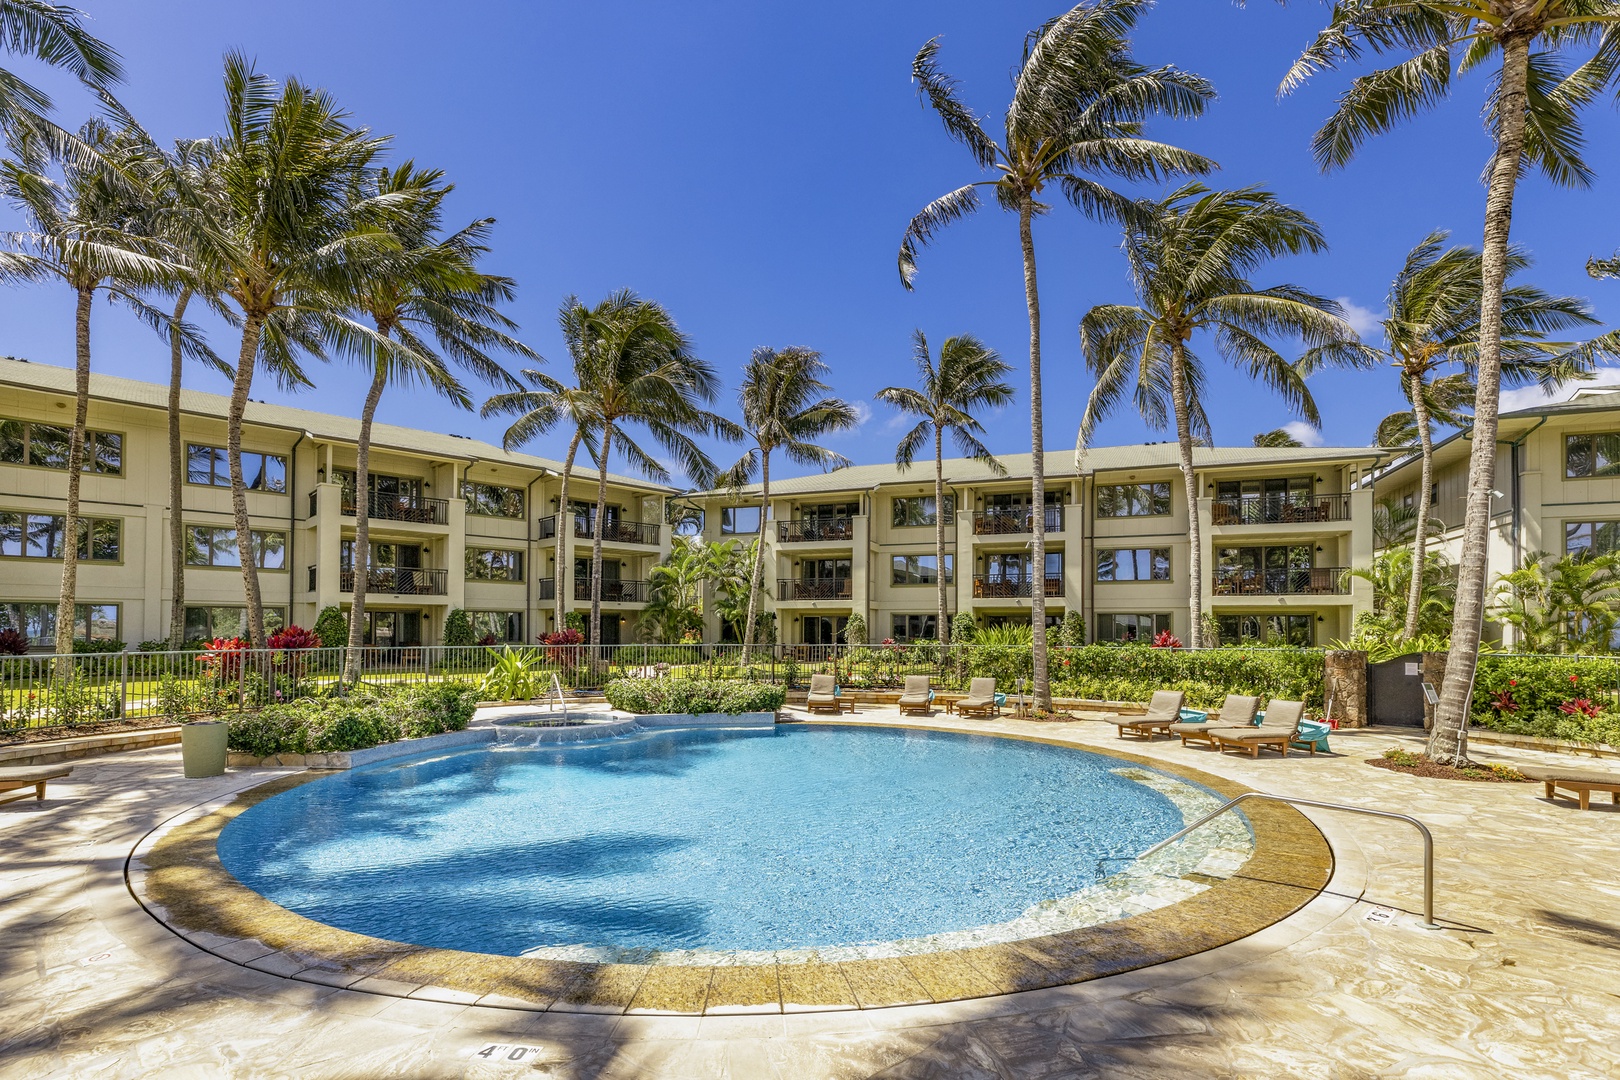 Kahuku Vacation Rentals, Turtle Bay Villas 304 - Please Note: Access to resort amenities is not included, however, the condo complex has its own pool, grills and is just steps to the beach!